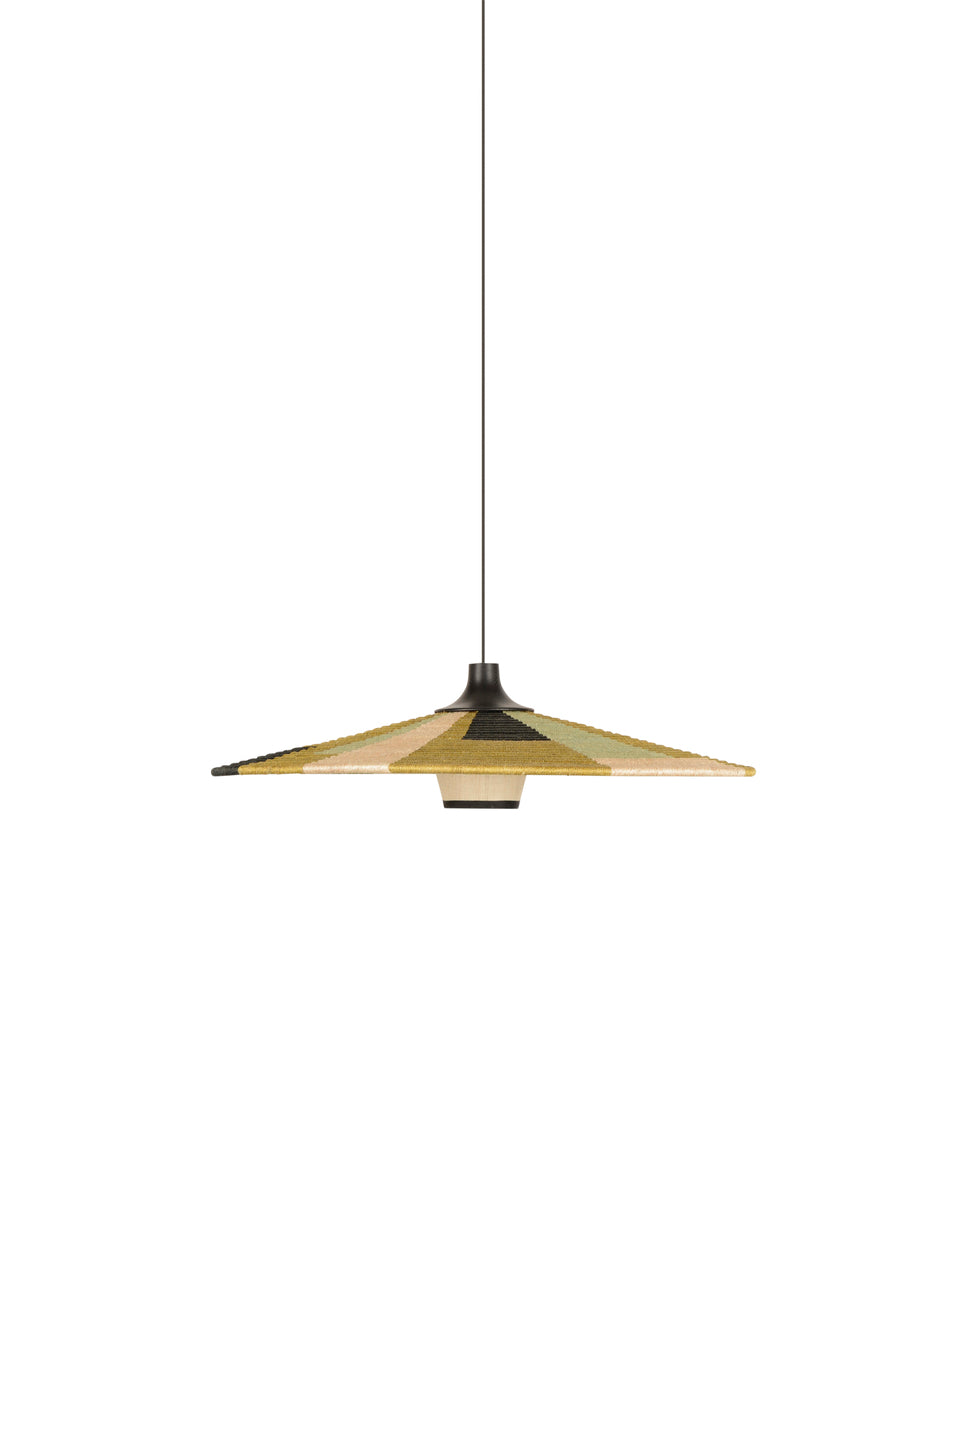 Parrot Large Pendant Light by Forestier